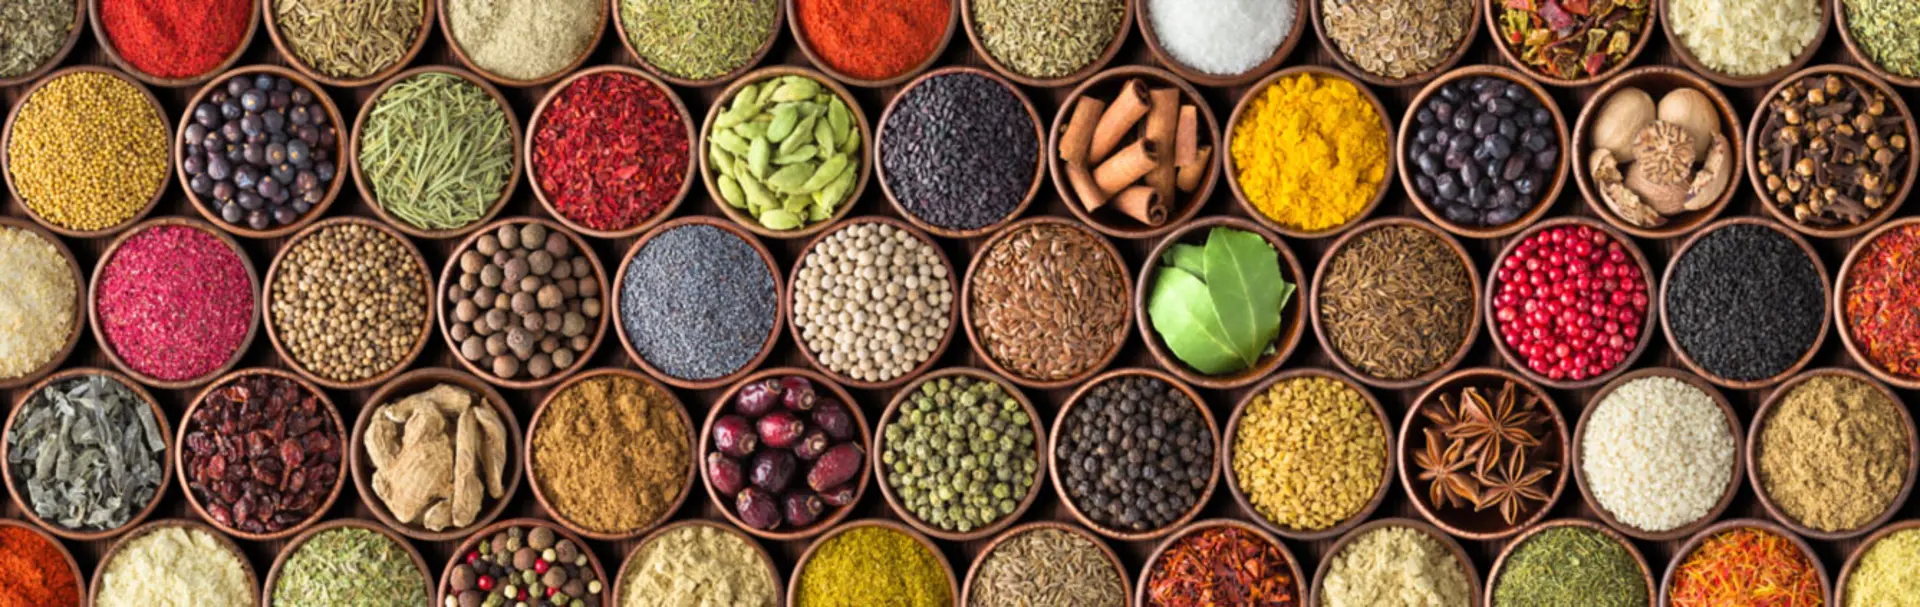 Bowls of spices, herbs and foods